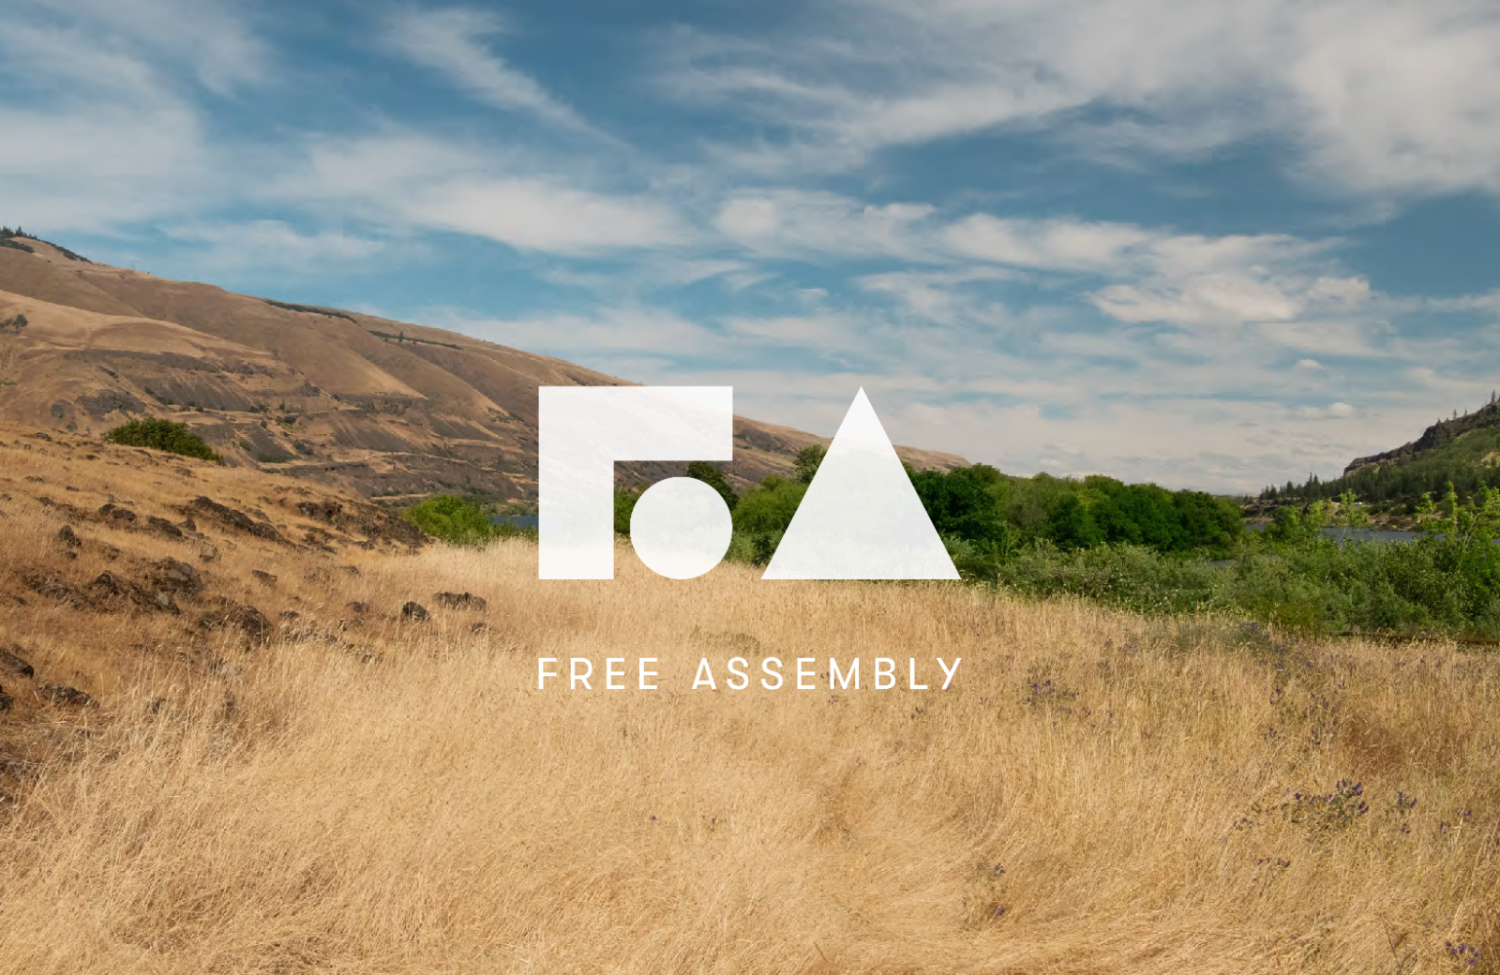 Doubling Down on Kids' Fashion — Introducing Free Assembly Kids